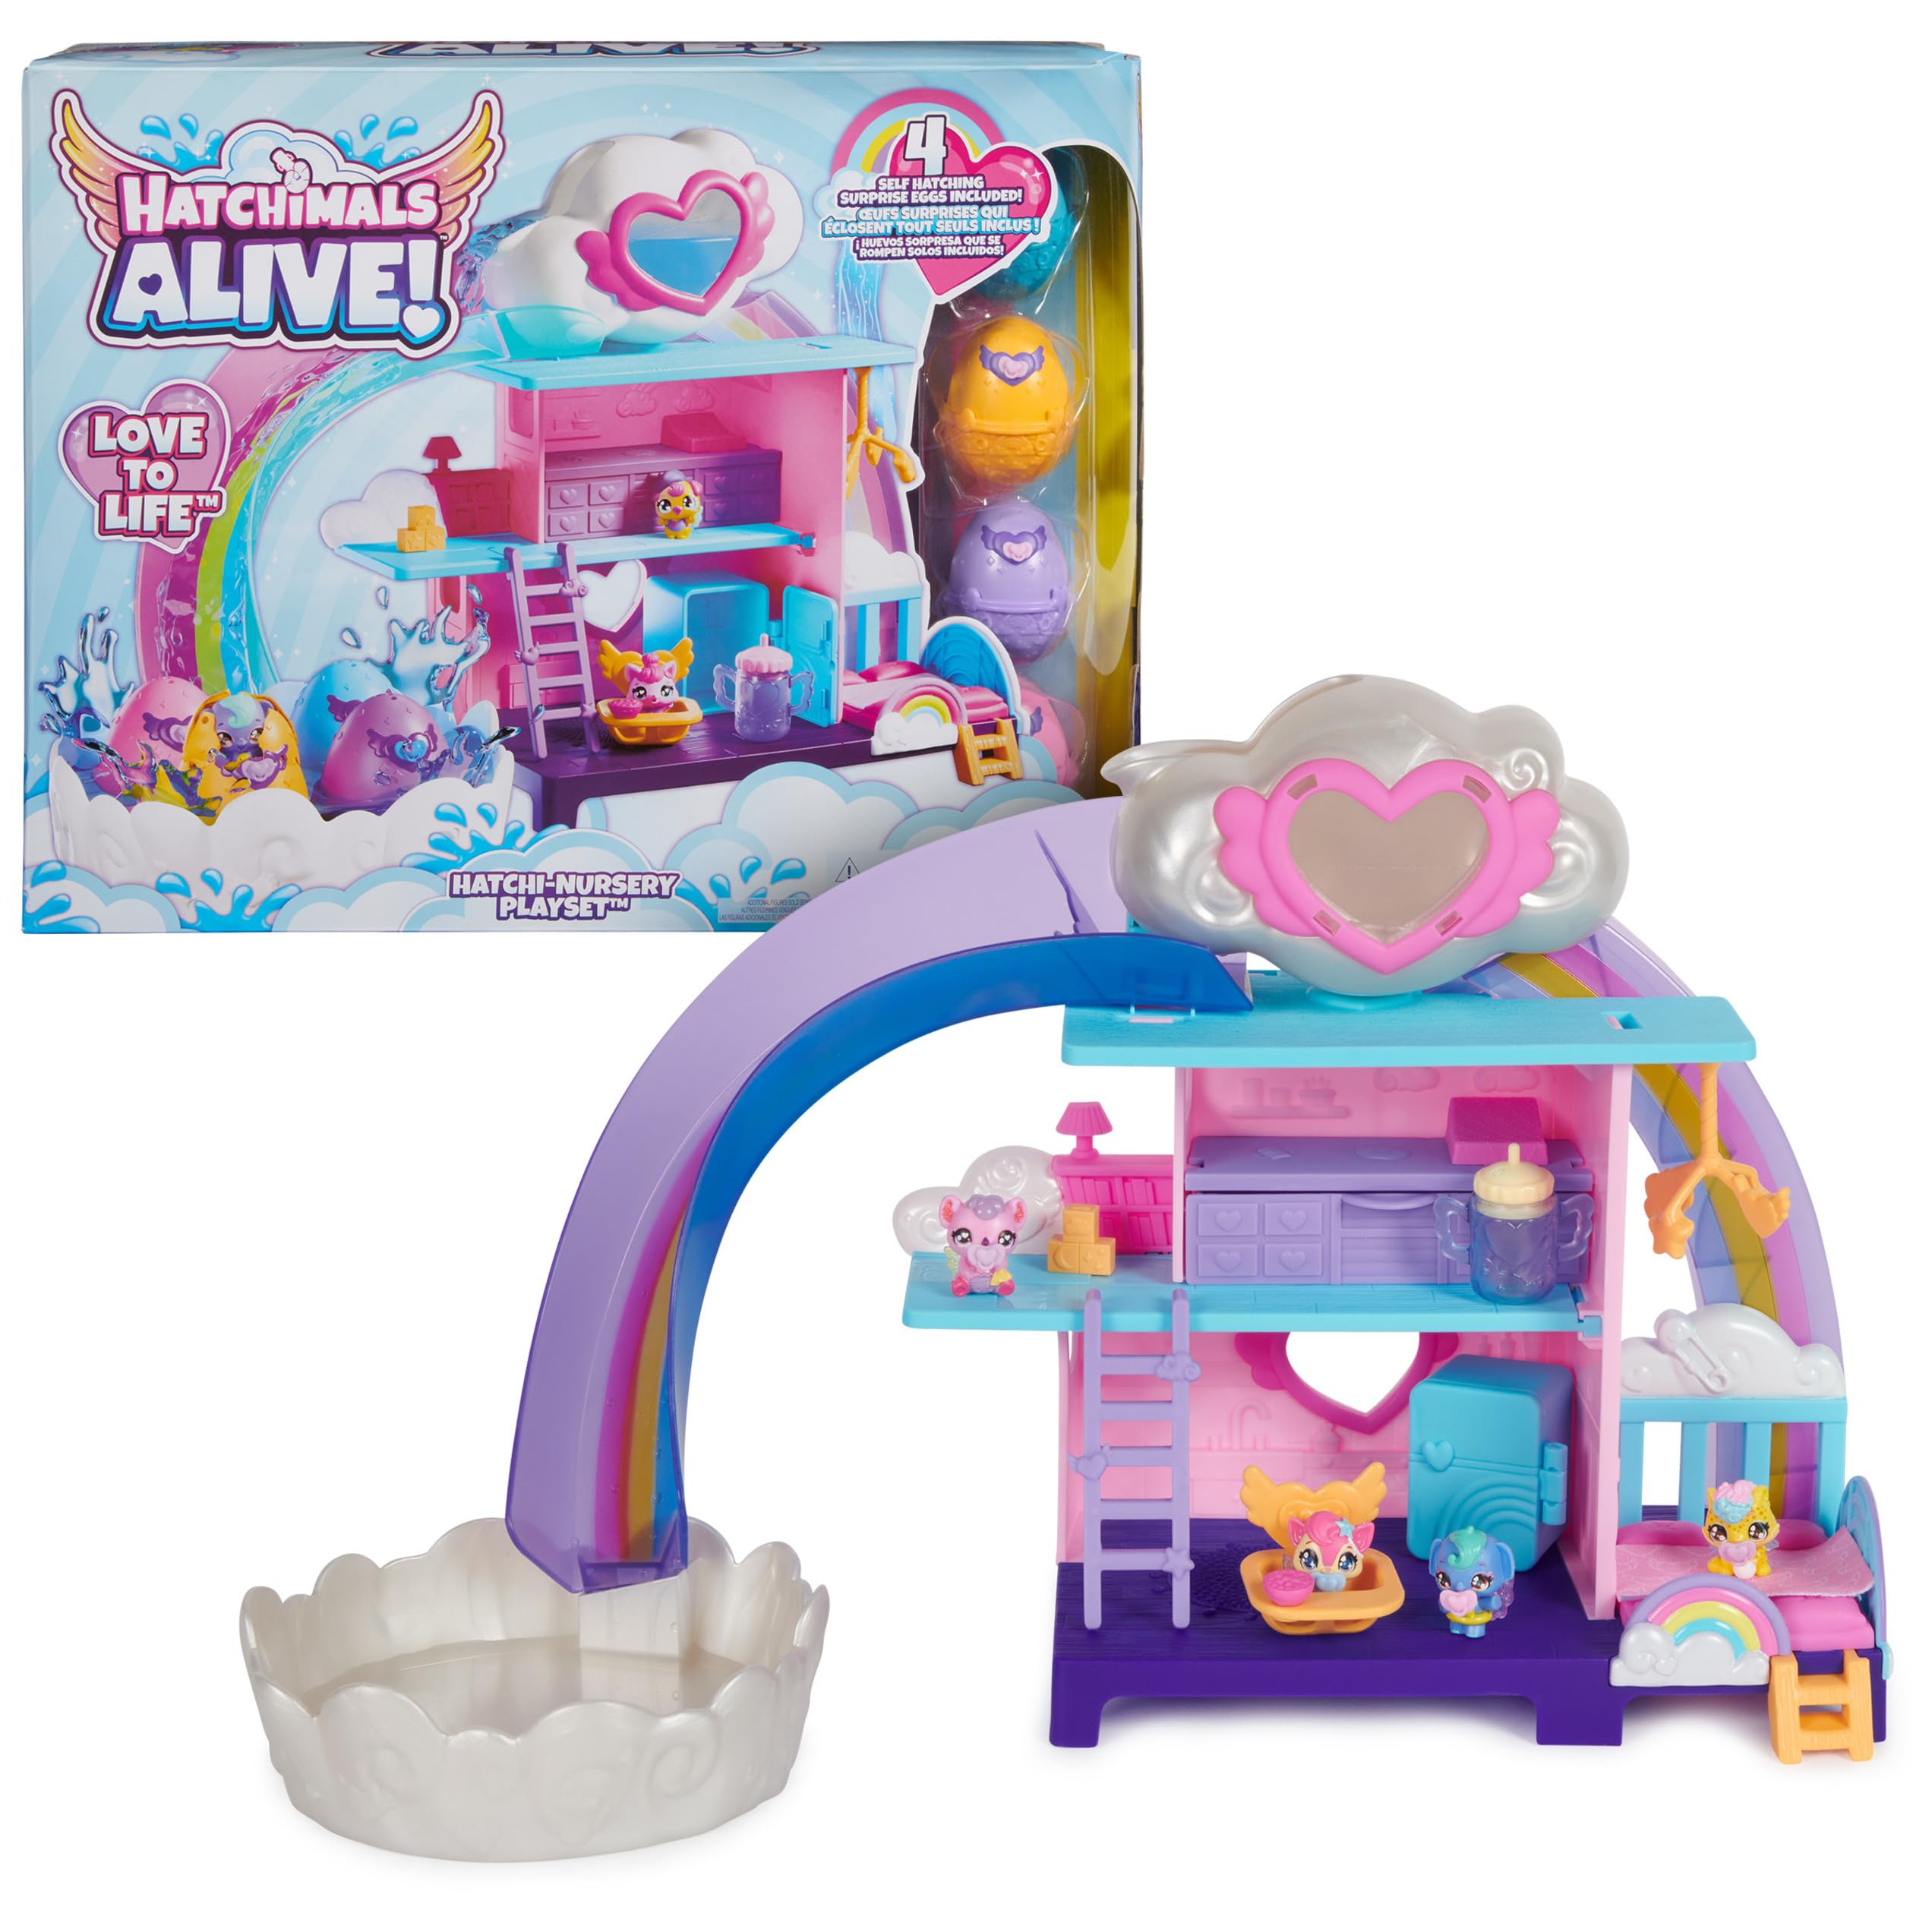 Hatchimals Alive, Hatchi-Nursery Playset Toy with 4 Mini Figures in Self-Hatching Eggs, 13 Accessories, Kids Toys for Girls and Boys Ages 3 and up